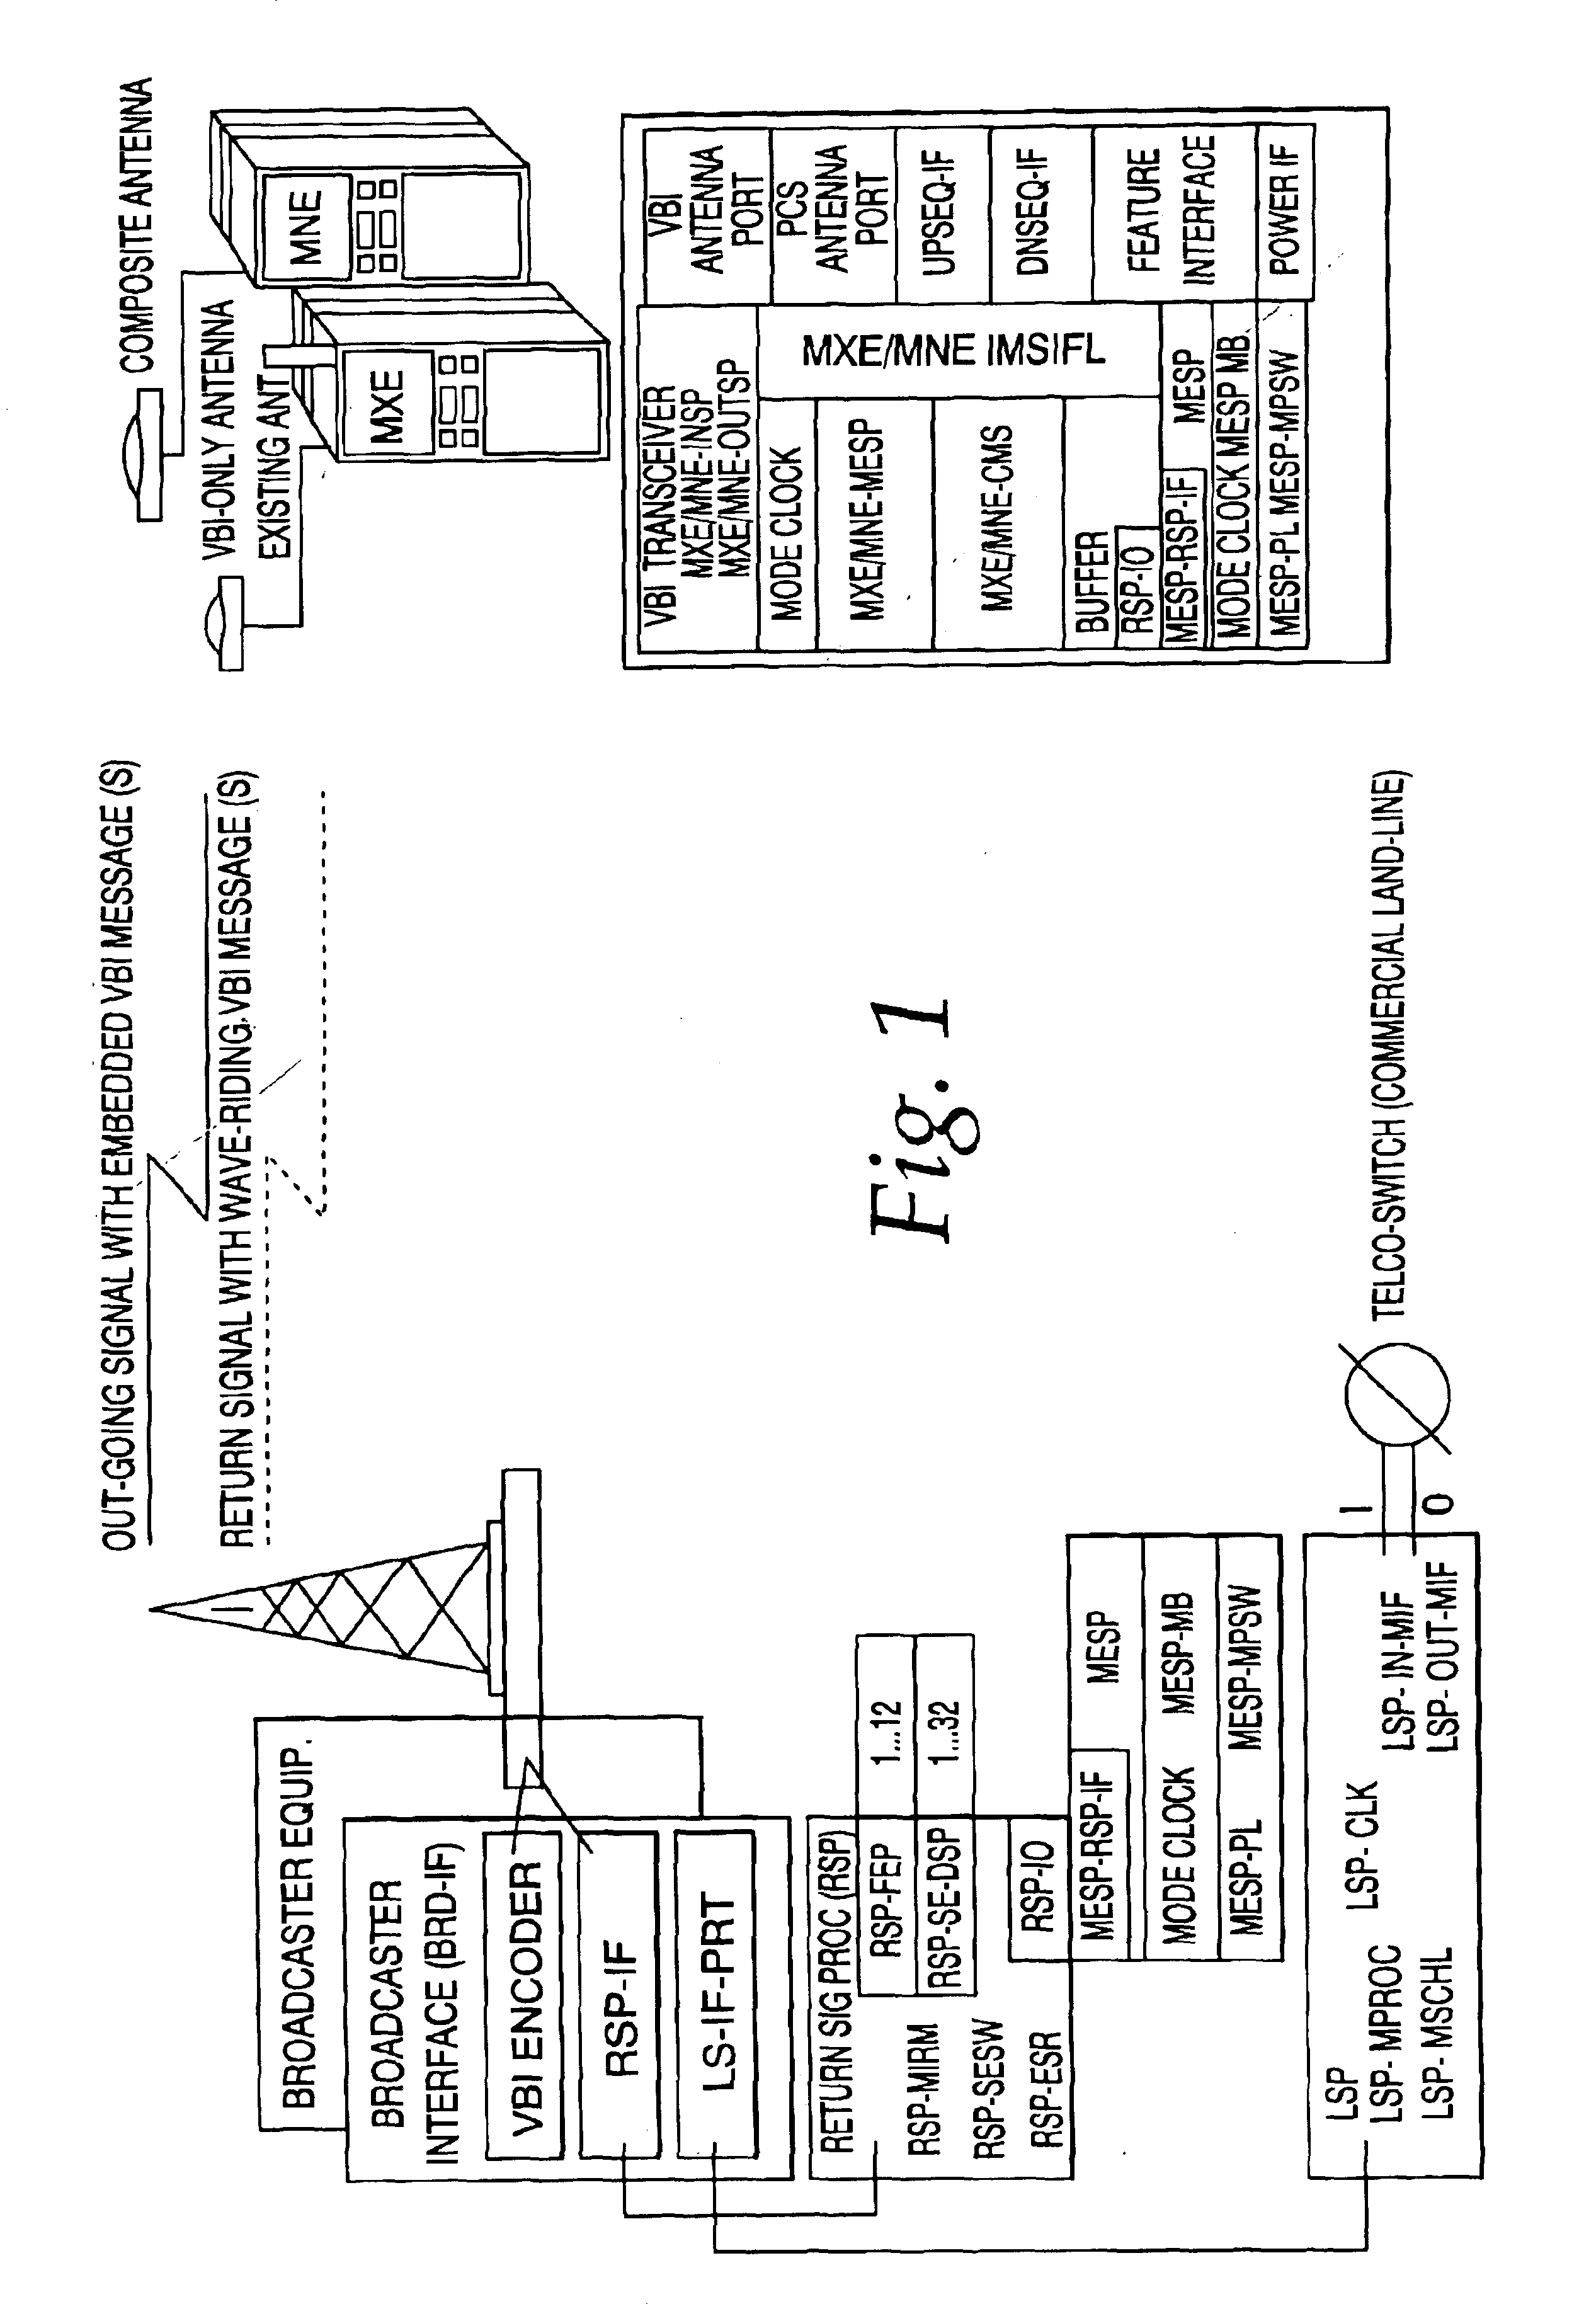 Apparatus and method for an enhanced PCS communication system